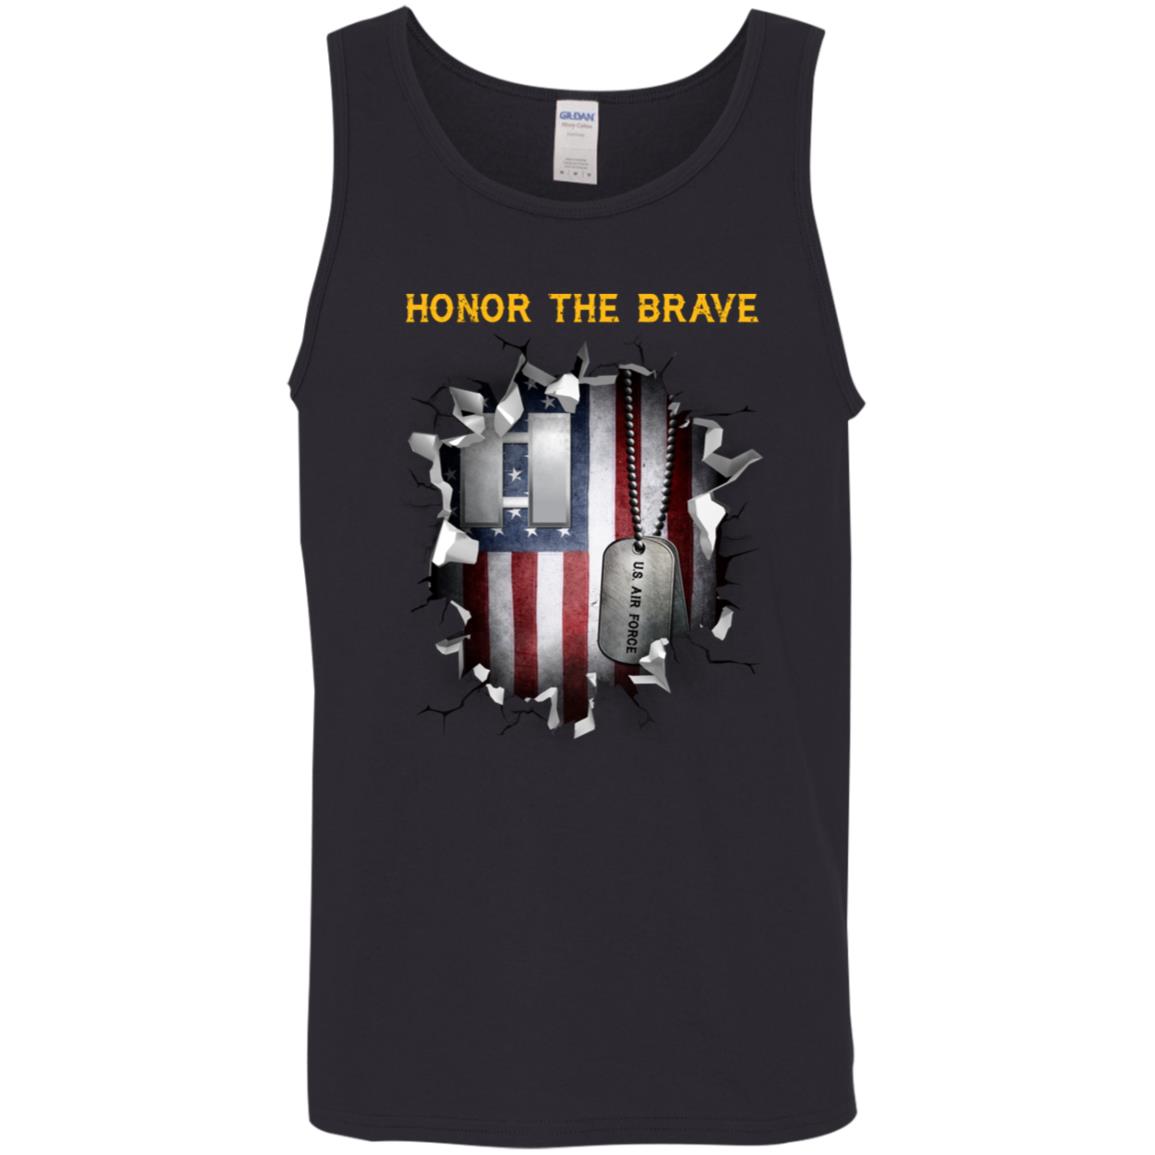 US Air Force O-3 Captain Capt O3 Commissioned Officer  - Honor The Brave - Honor The Brave Front Shirt